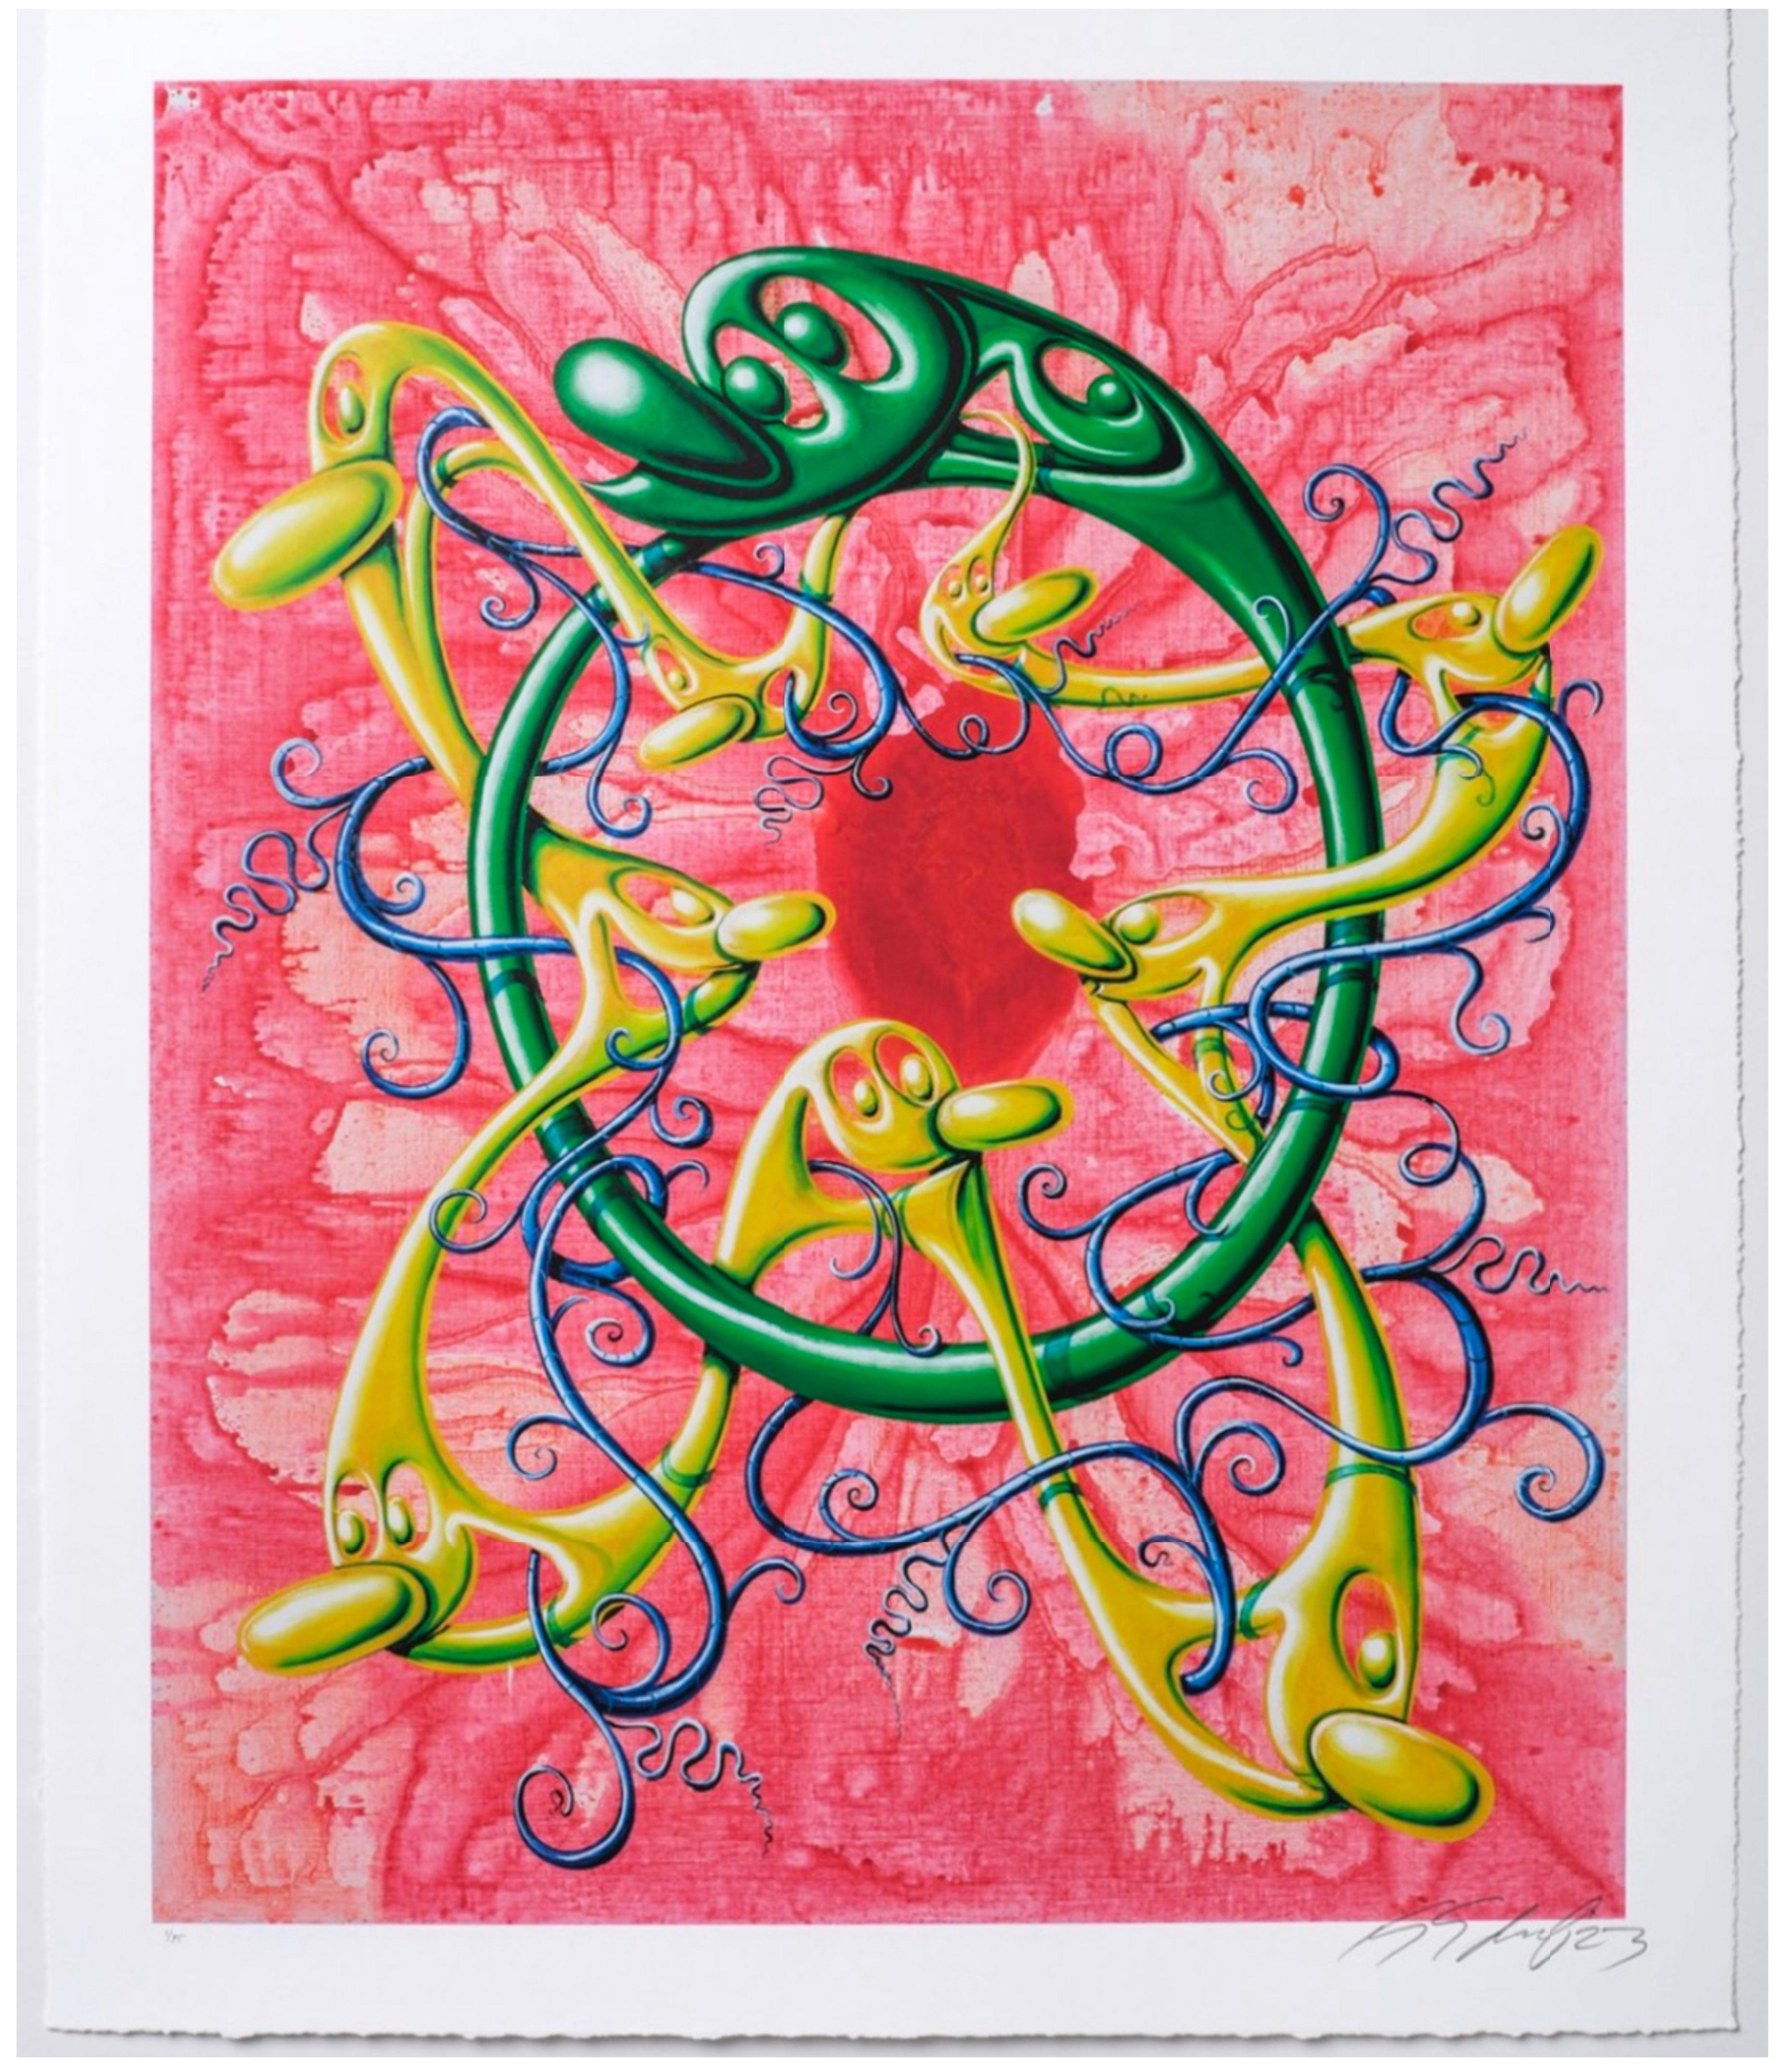 VRING! - Print by Kenny Scharf